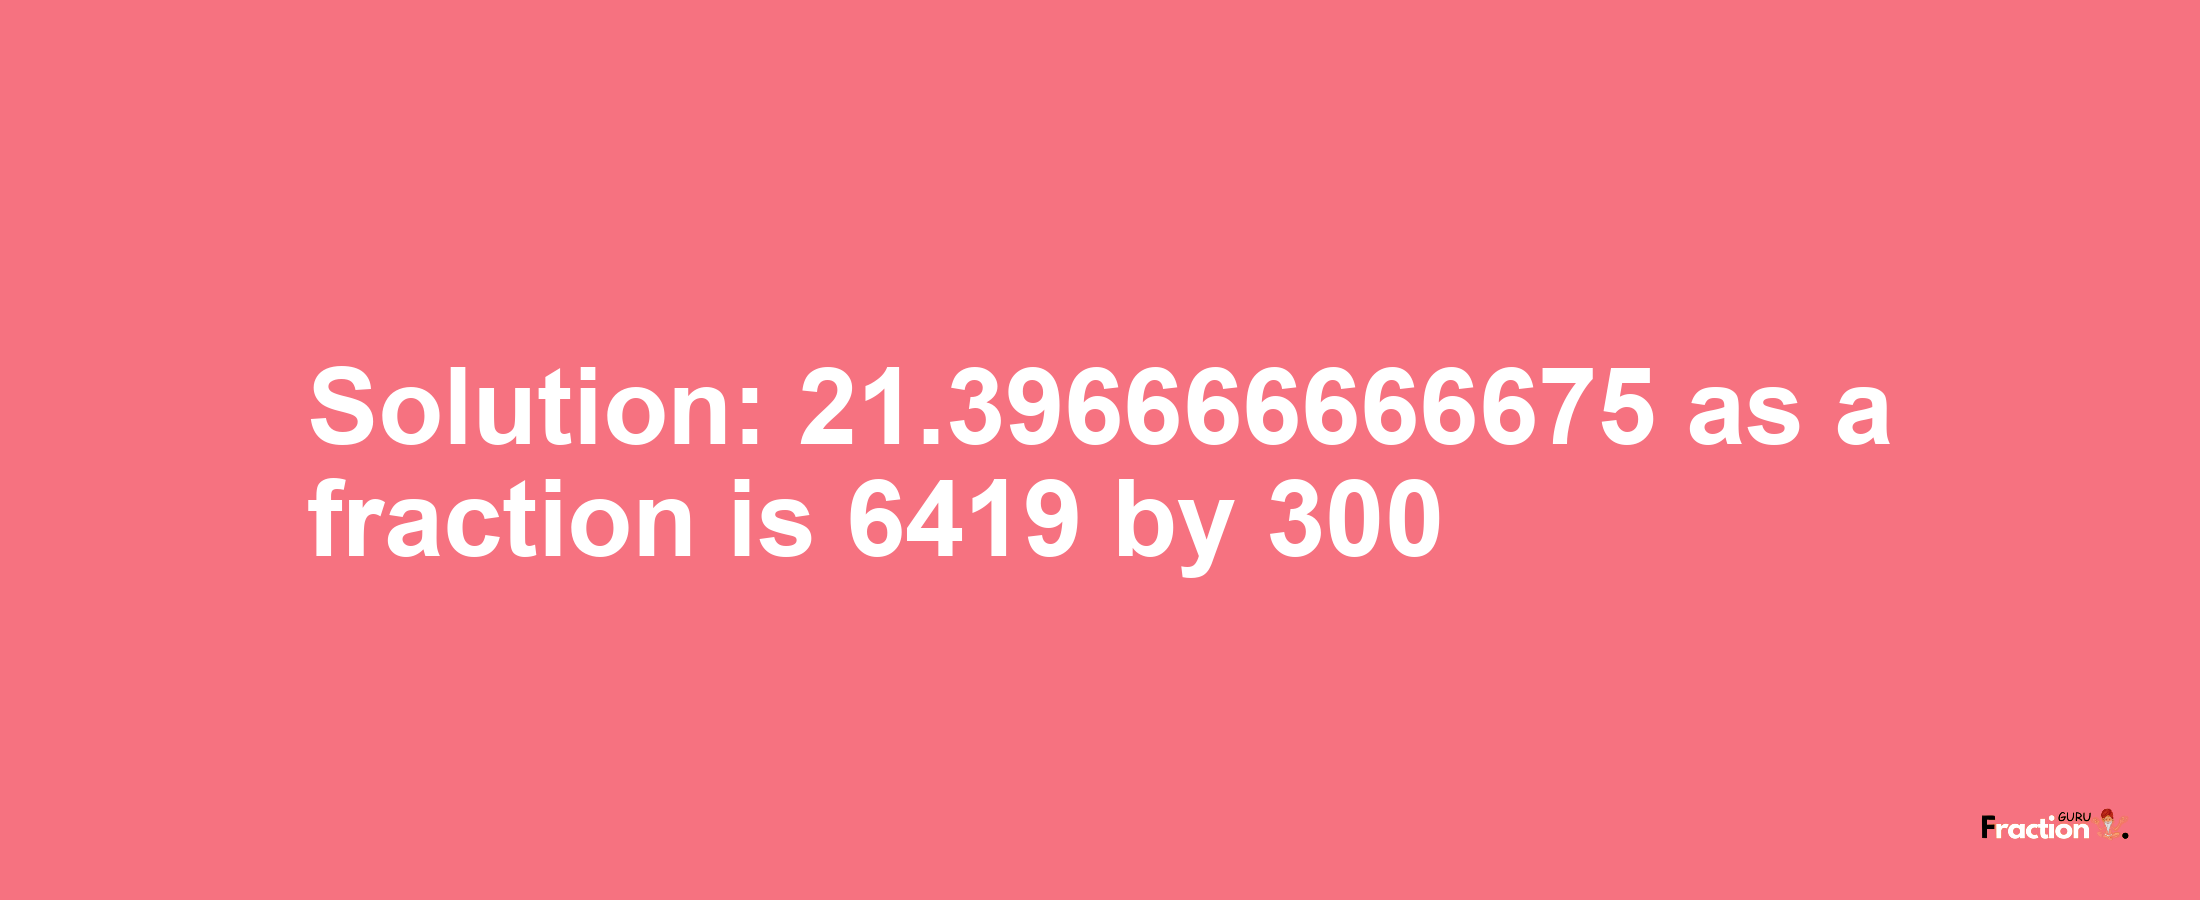 Solution:21.396666666675 as a fraction is 6419/300